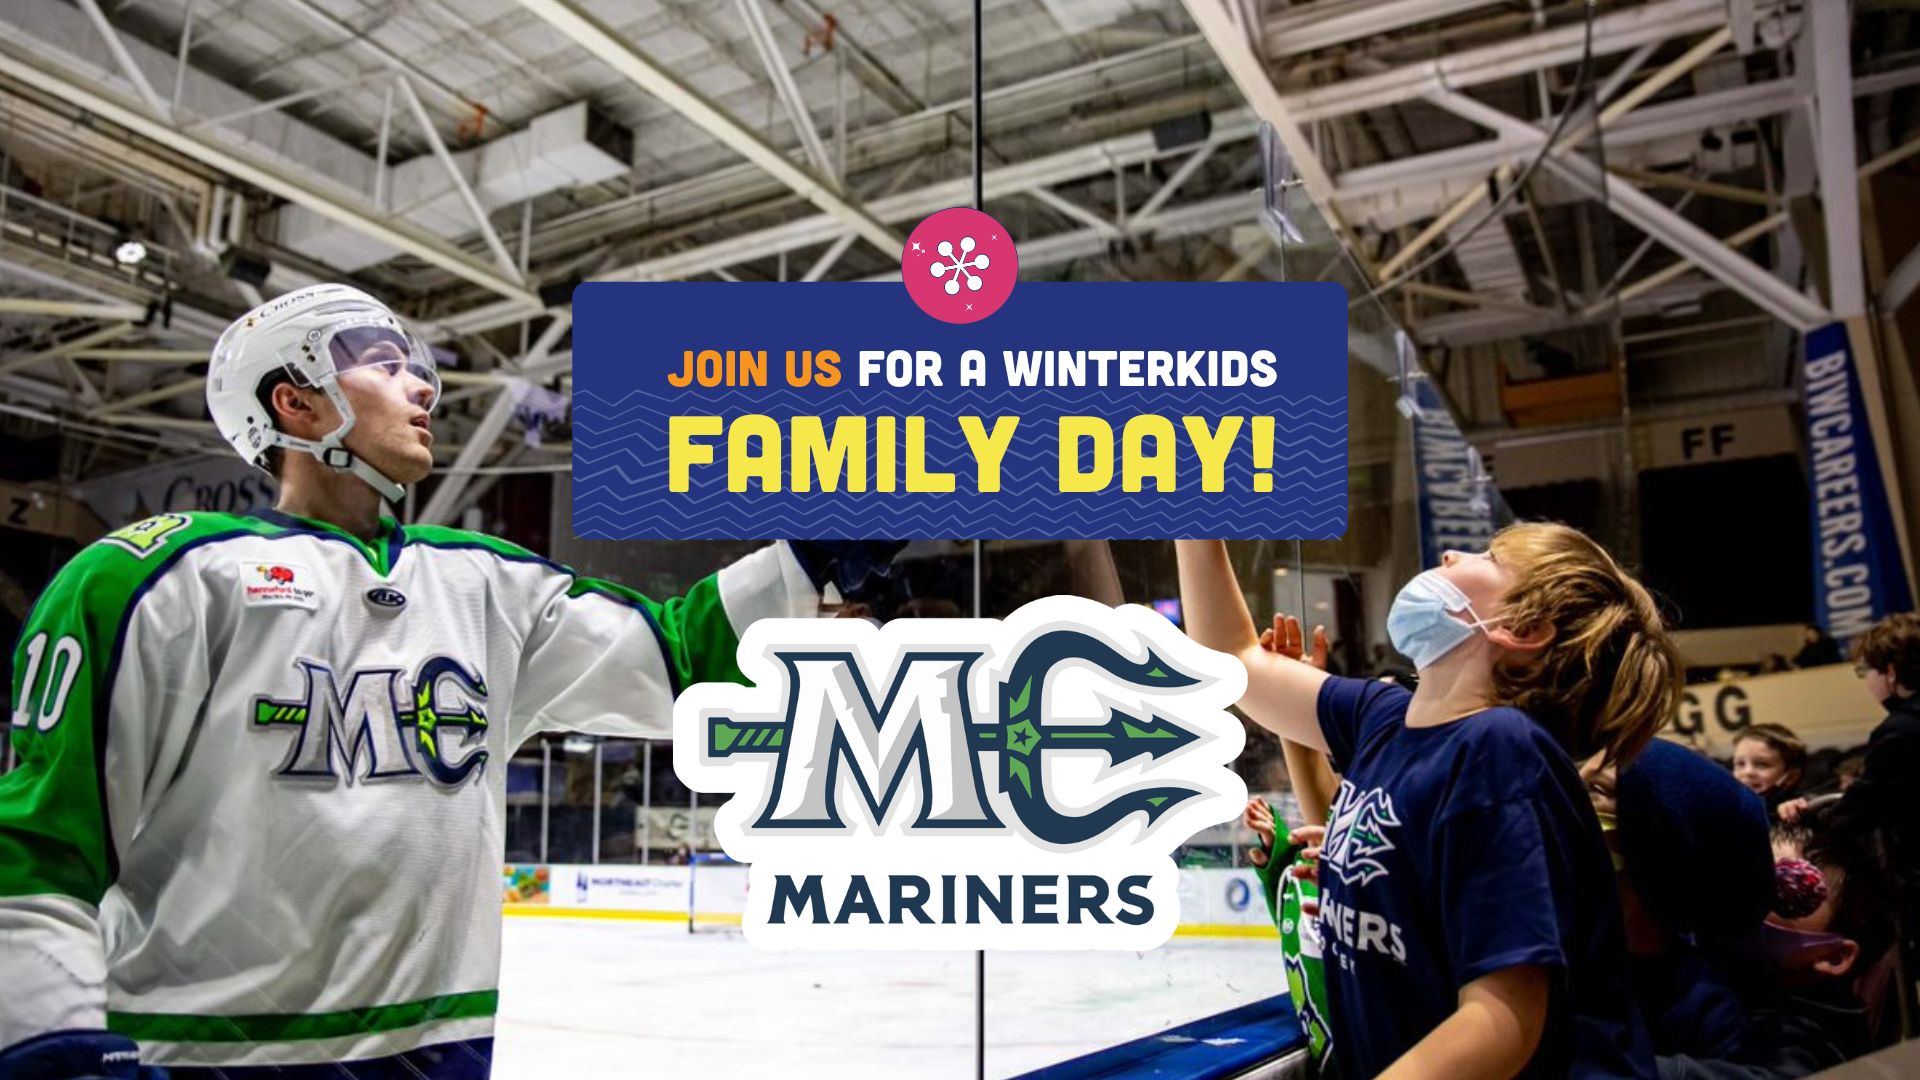 WinterKids Family Days Headers FB Covers FY23